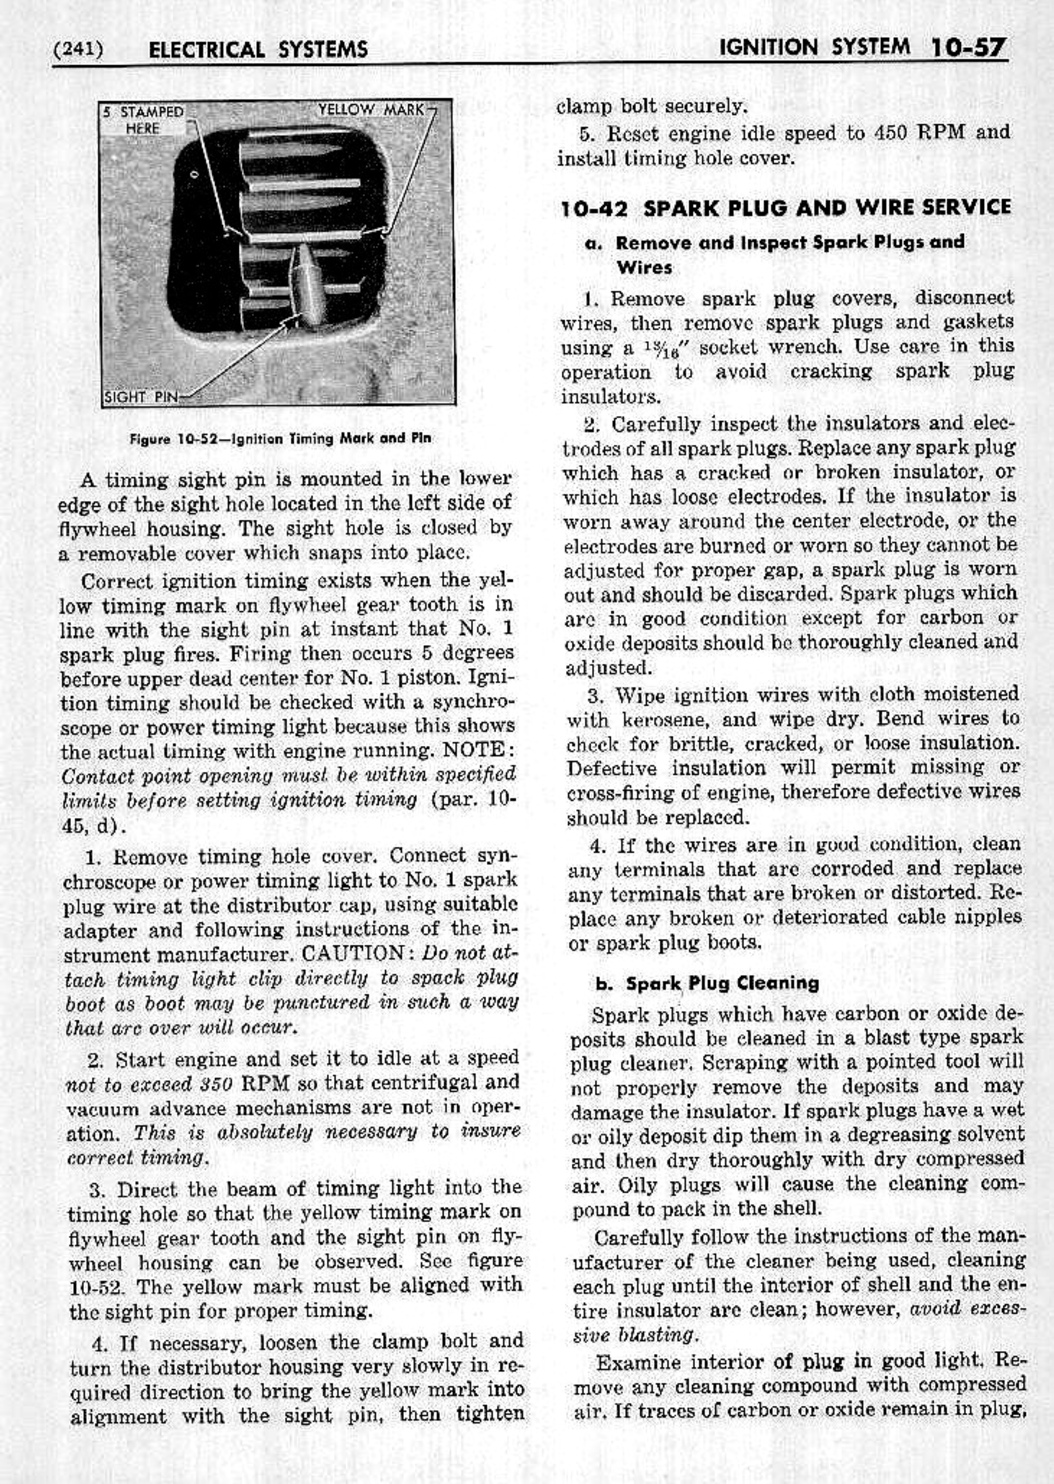 n_11 1953 Buick Shop Manual - Electrical Systems-057-057.jpg